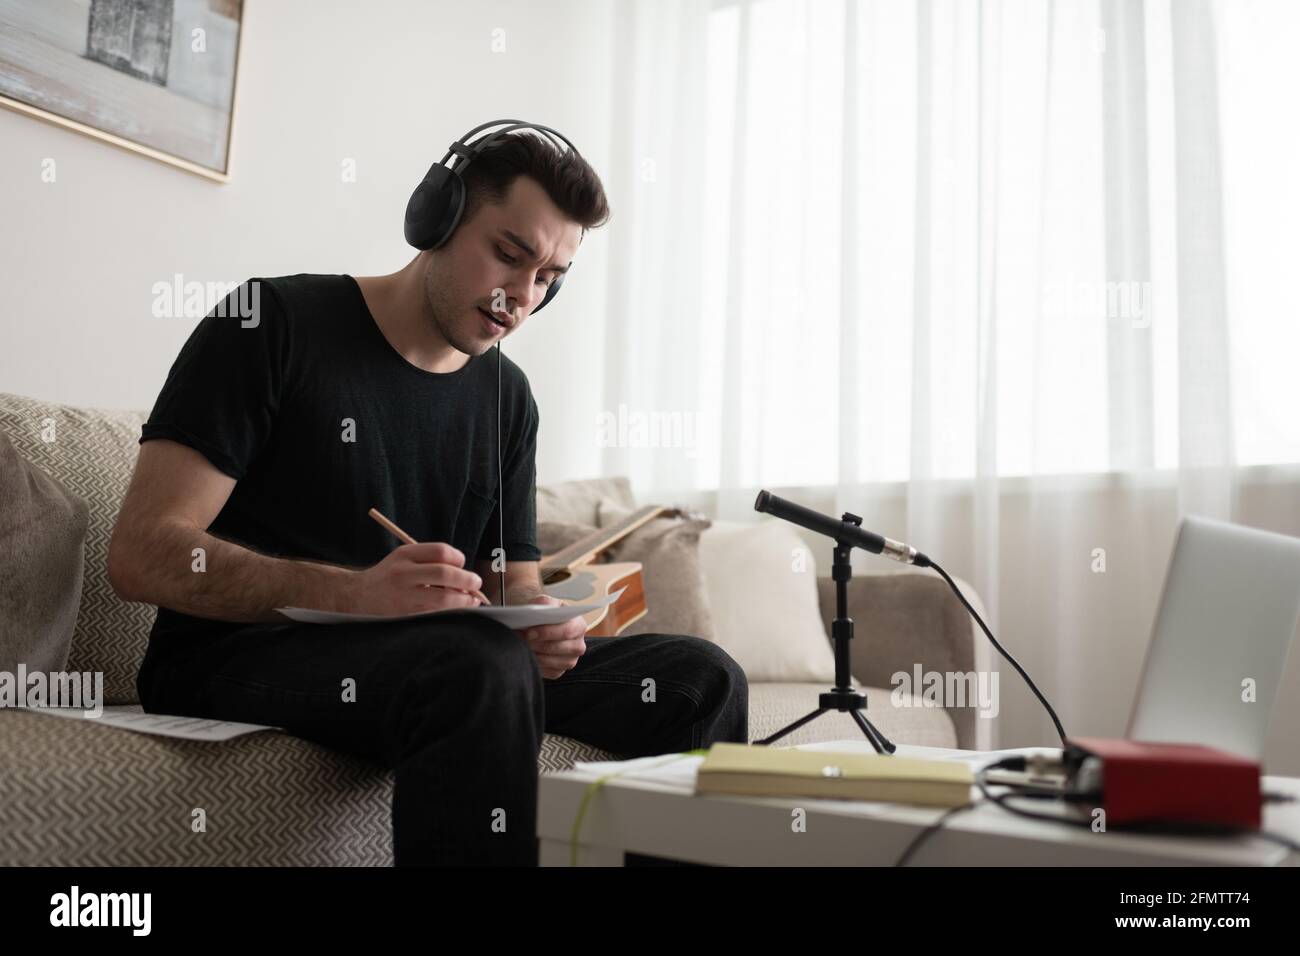 Male musician composing music at home Stock Photo